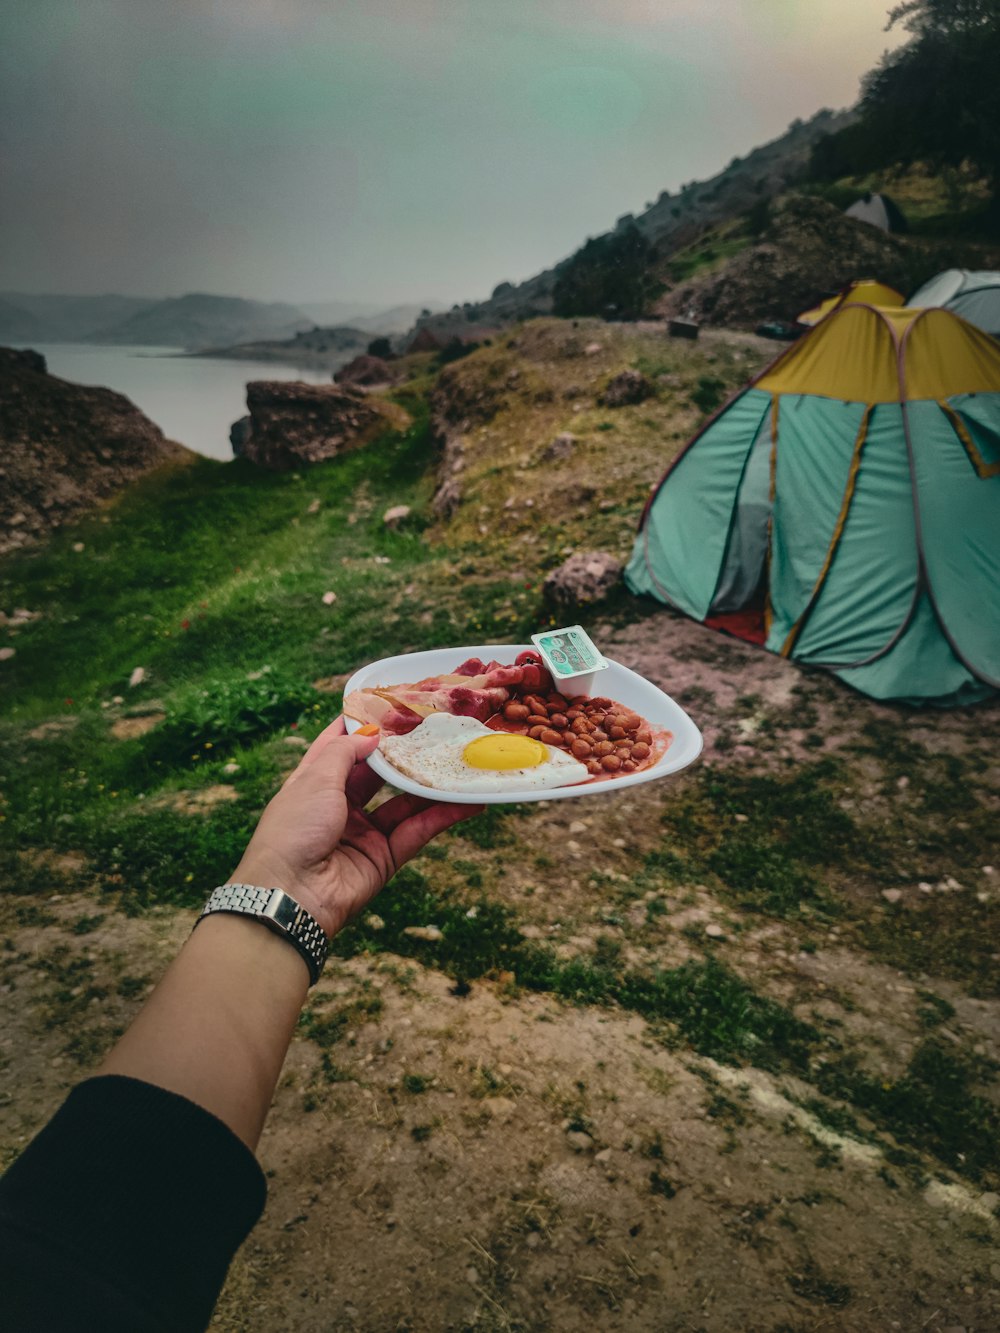 a person holding a plate of food in front of a tent